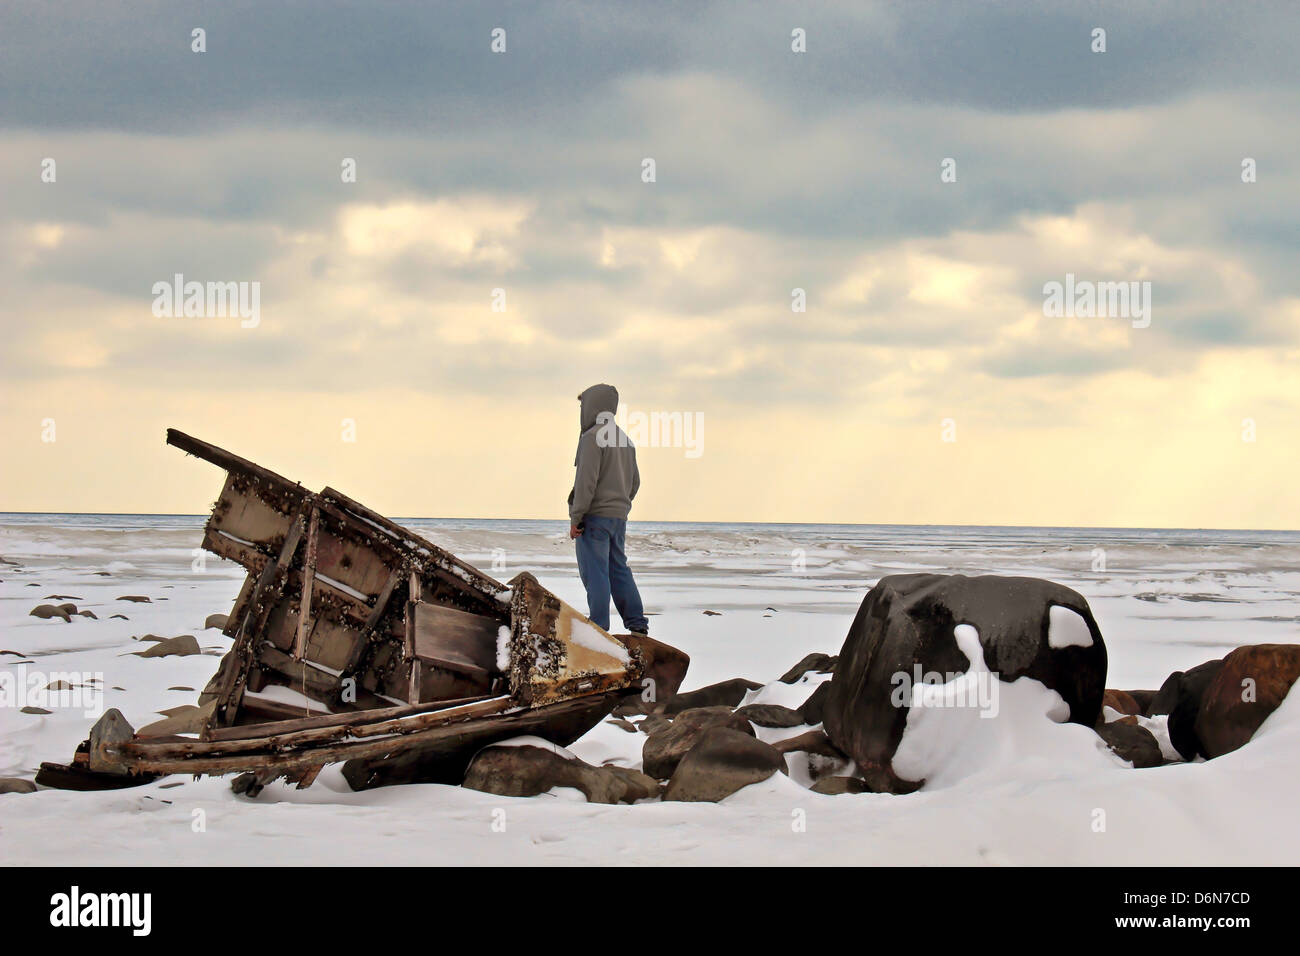 Adolescent male looking out over a frozen Lake Huron with a shipwreck in the foreground. Stock Photo